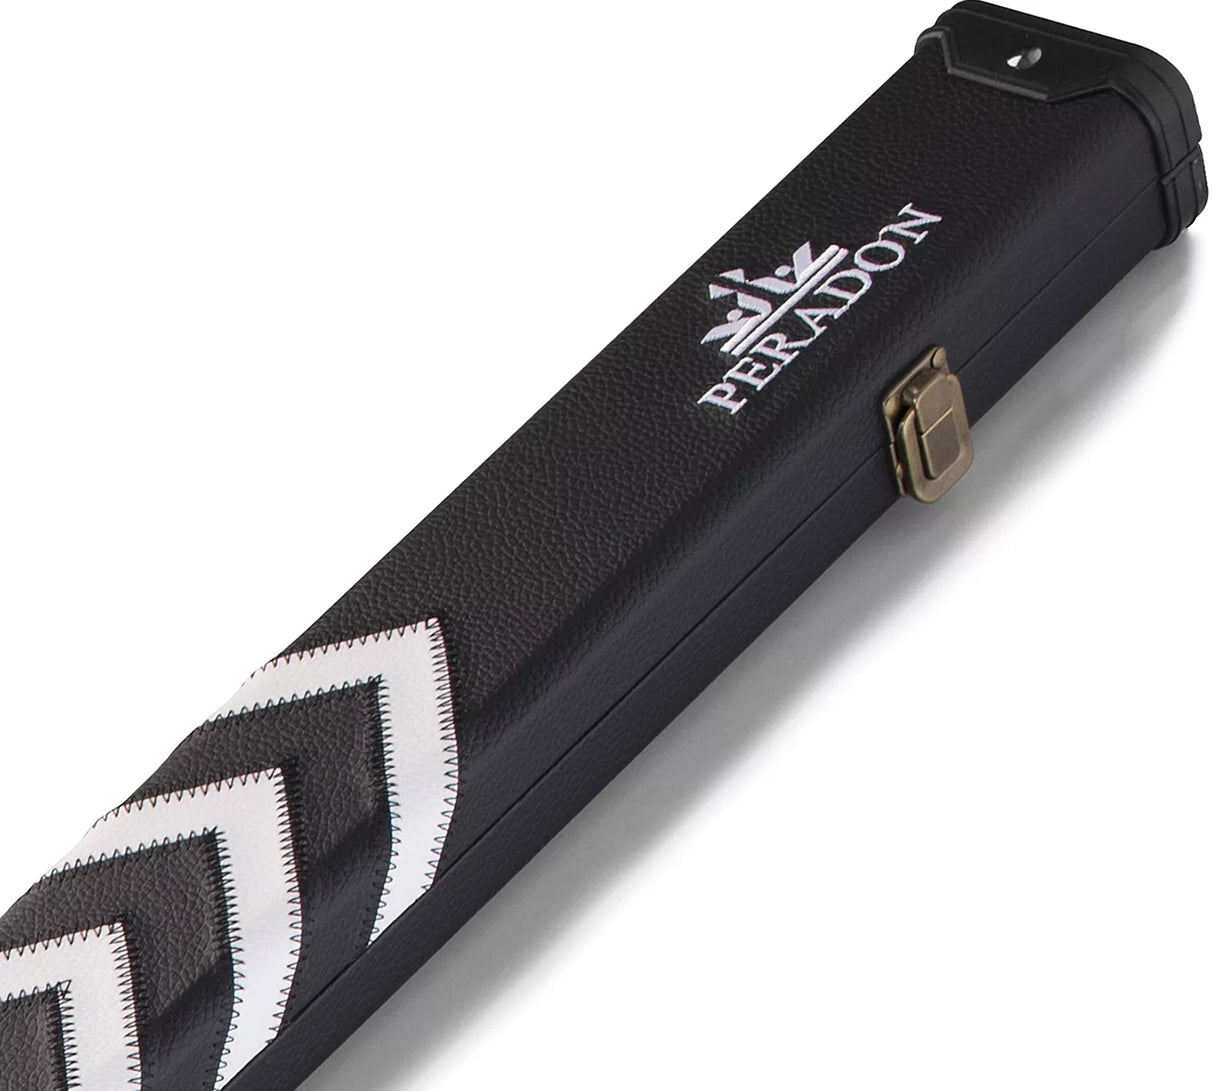 Peradon Black and White Clubman One Piece Cue Case. End view